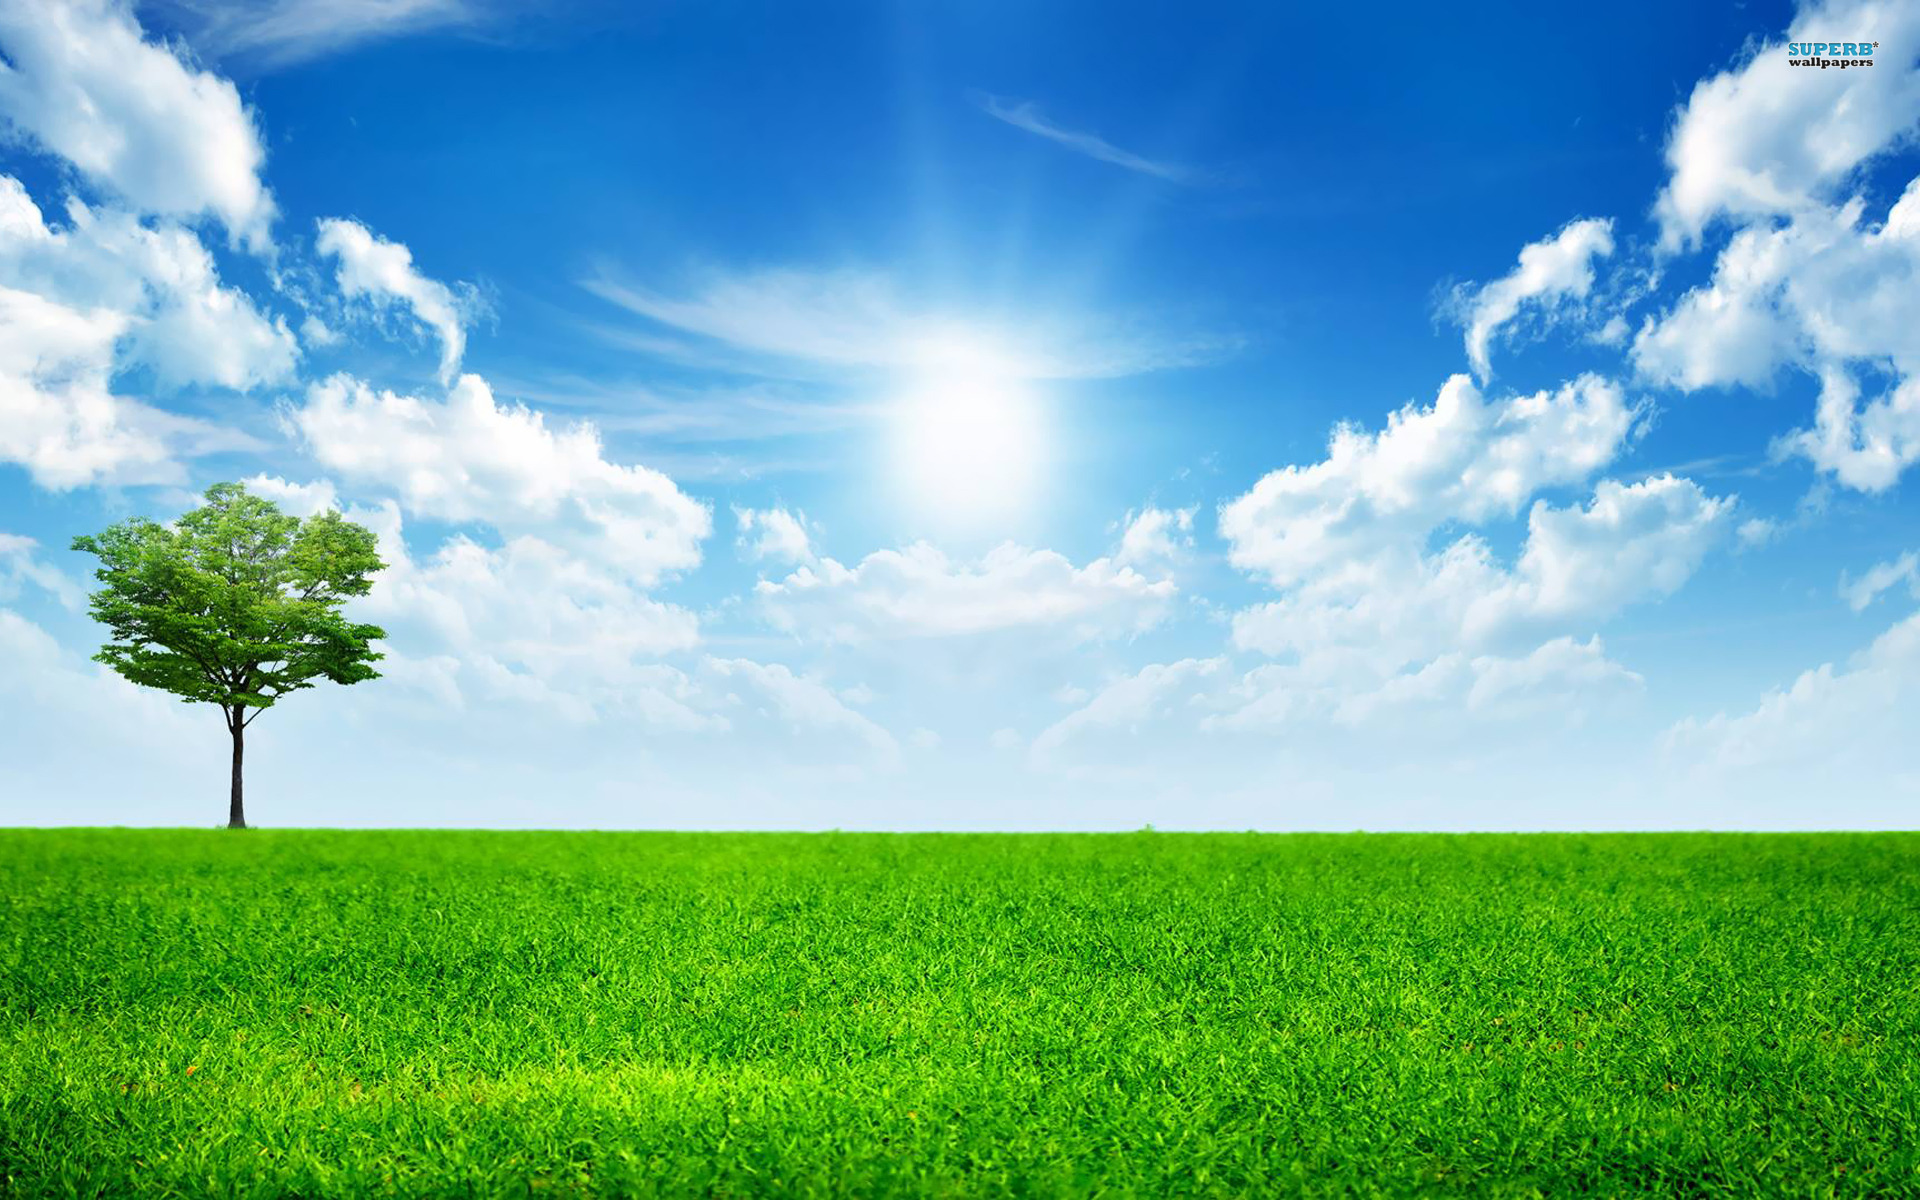 Sunny Day Background wallpaper  1920x1200  32061